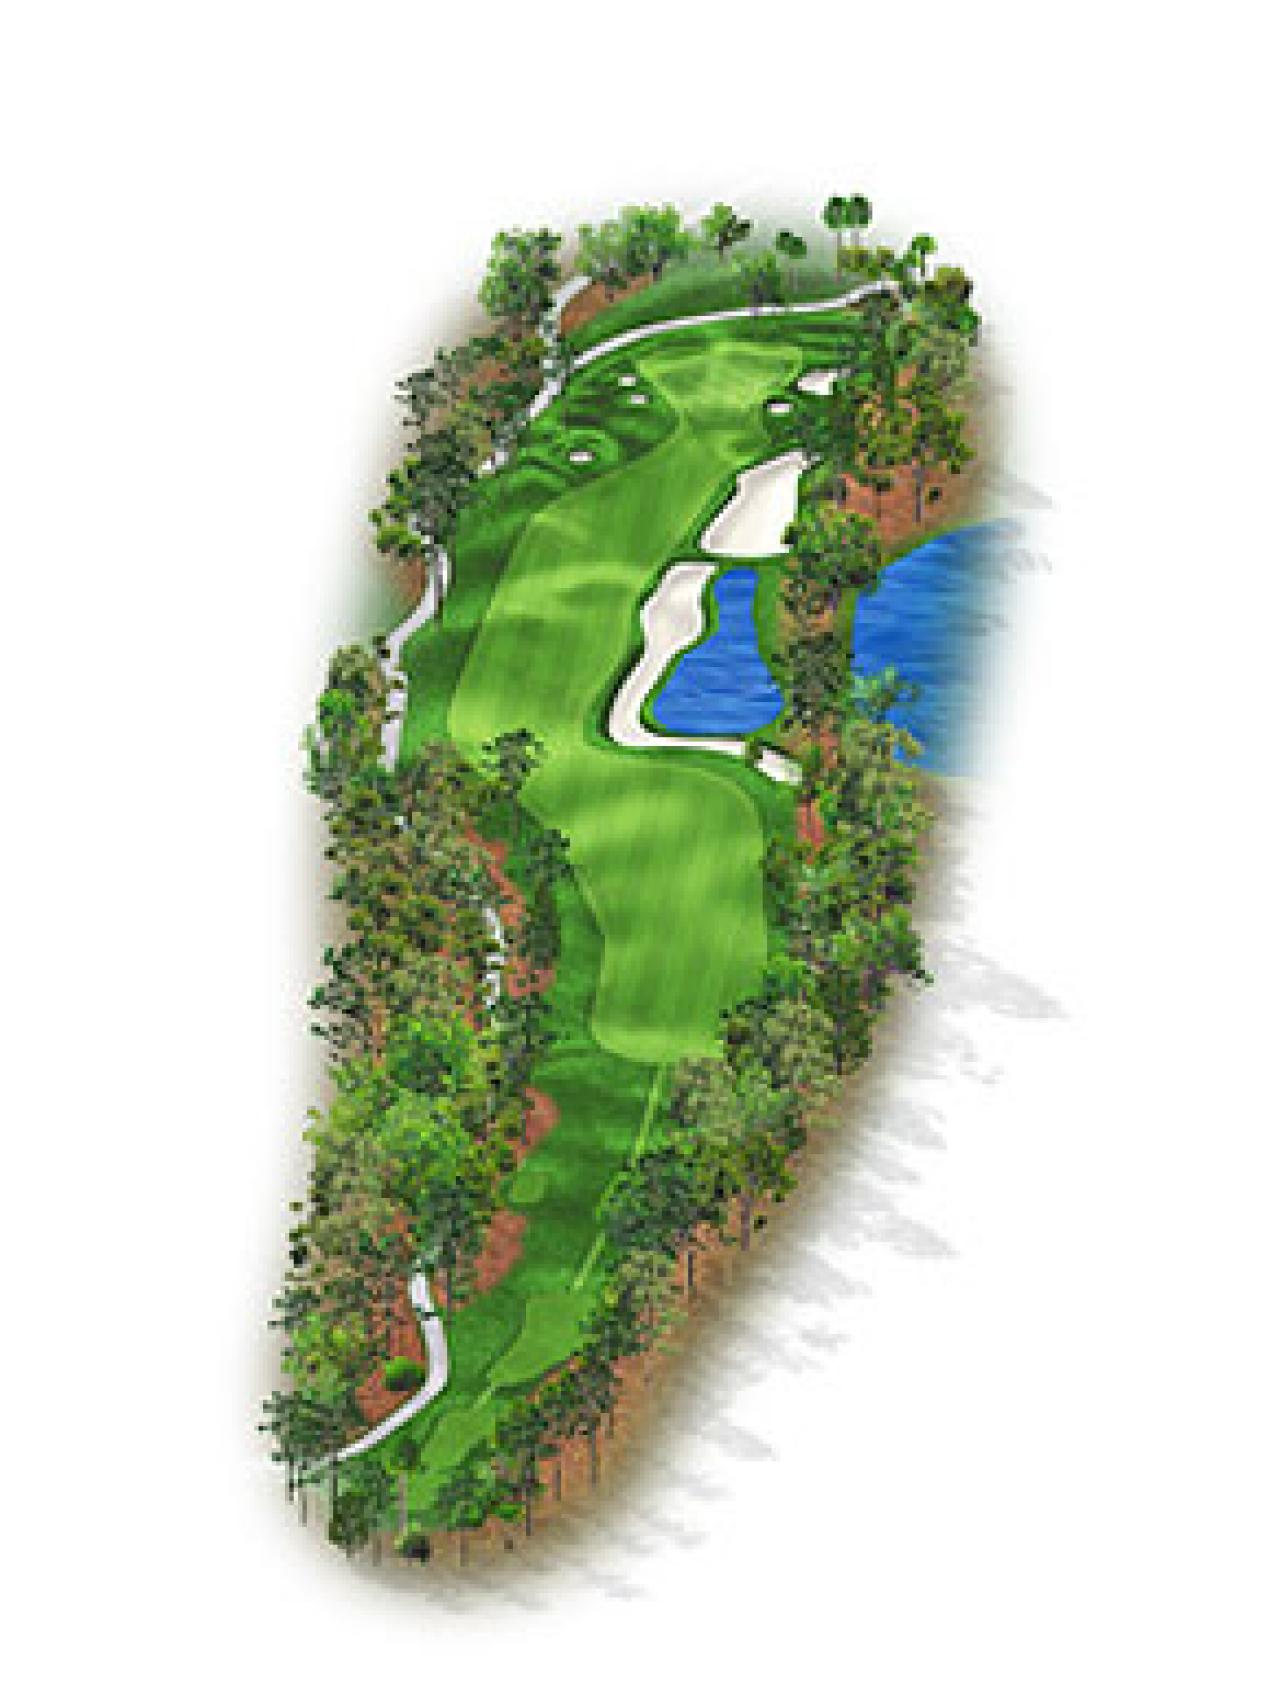 TPC - Sawgrass Stadium Course: Hole by Hole, Courses